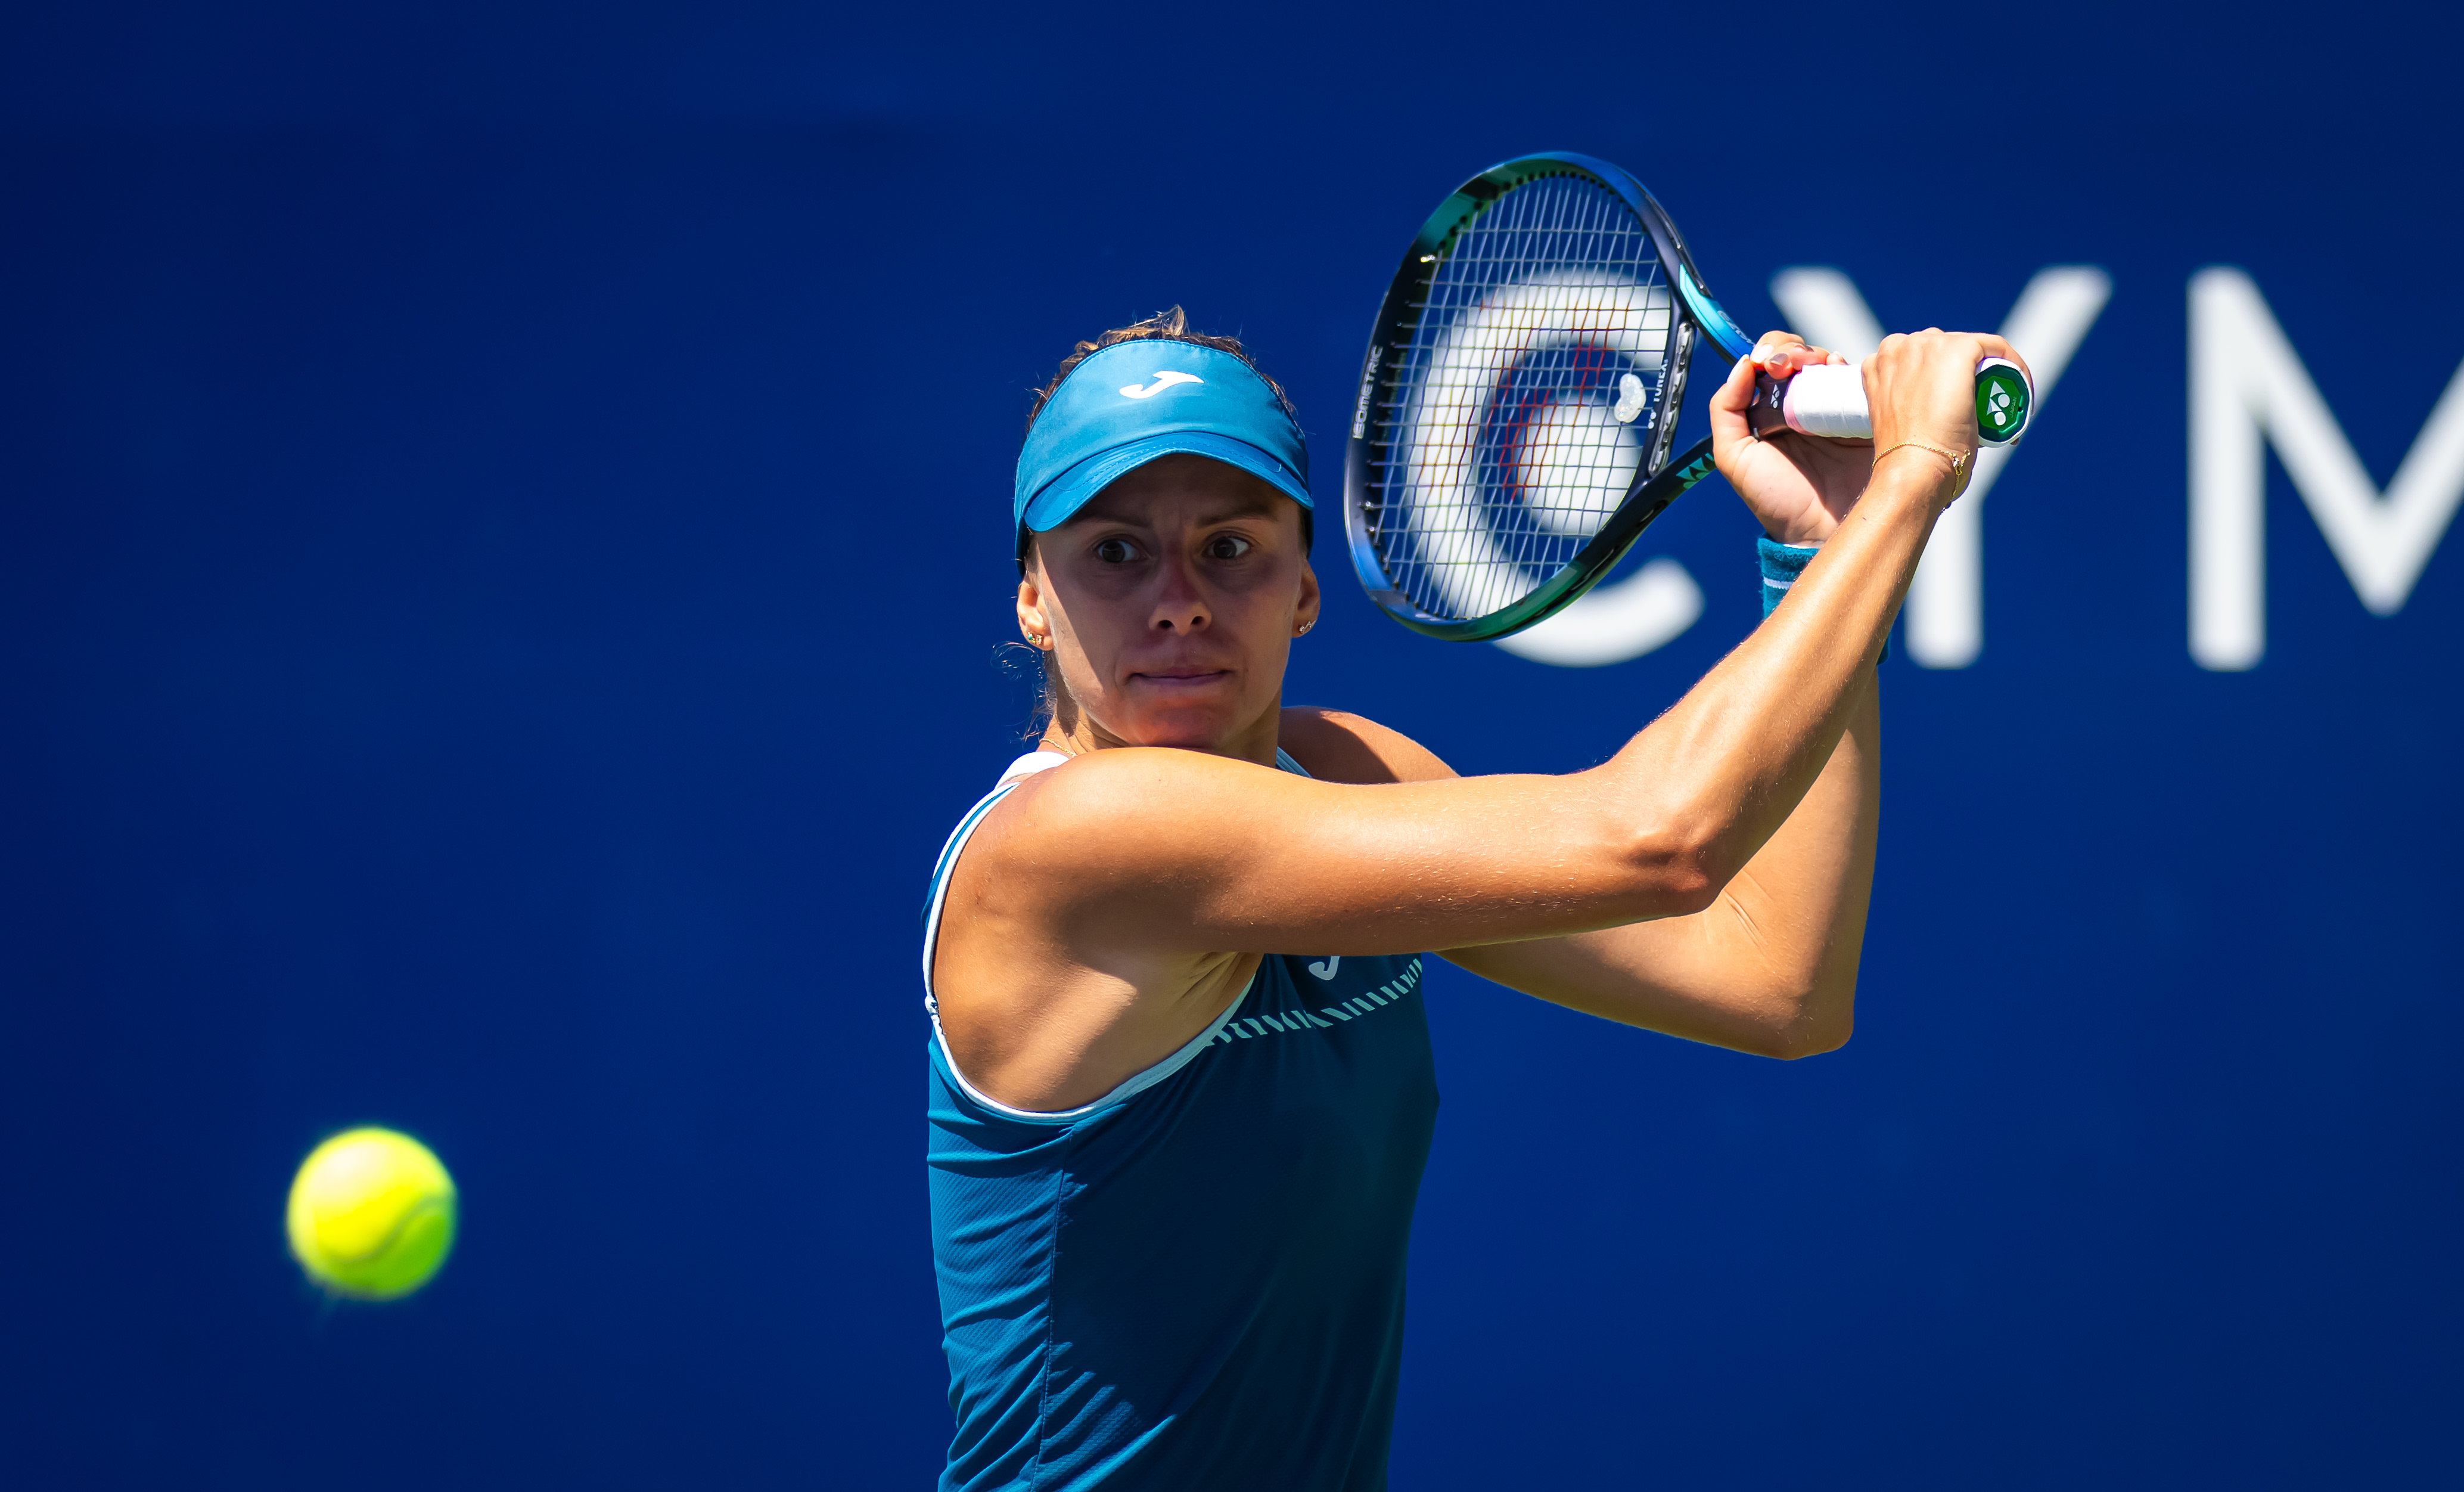 Magda Linette leads top seeds into Guangzhou quarterfinals; mens events begin in Asia